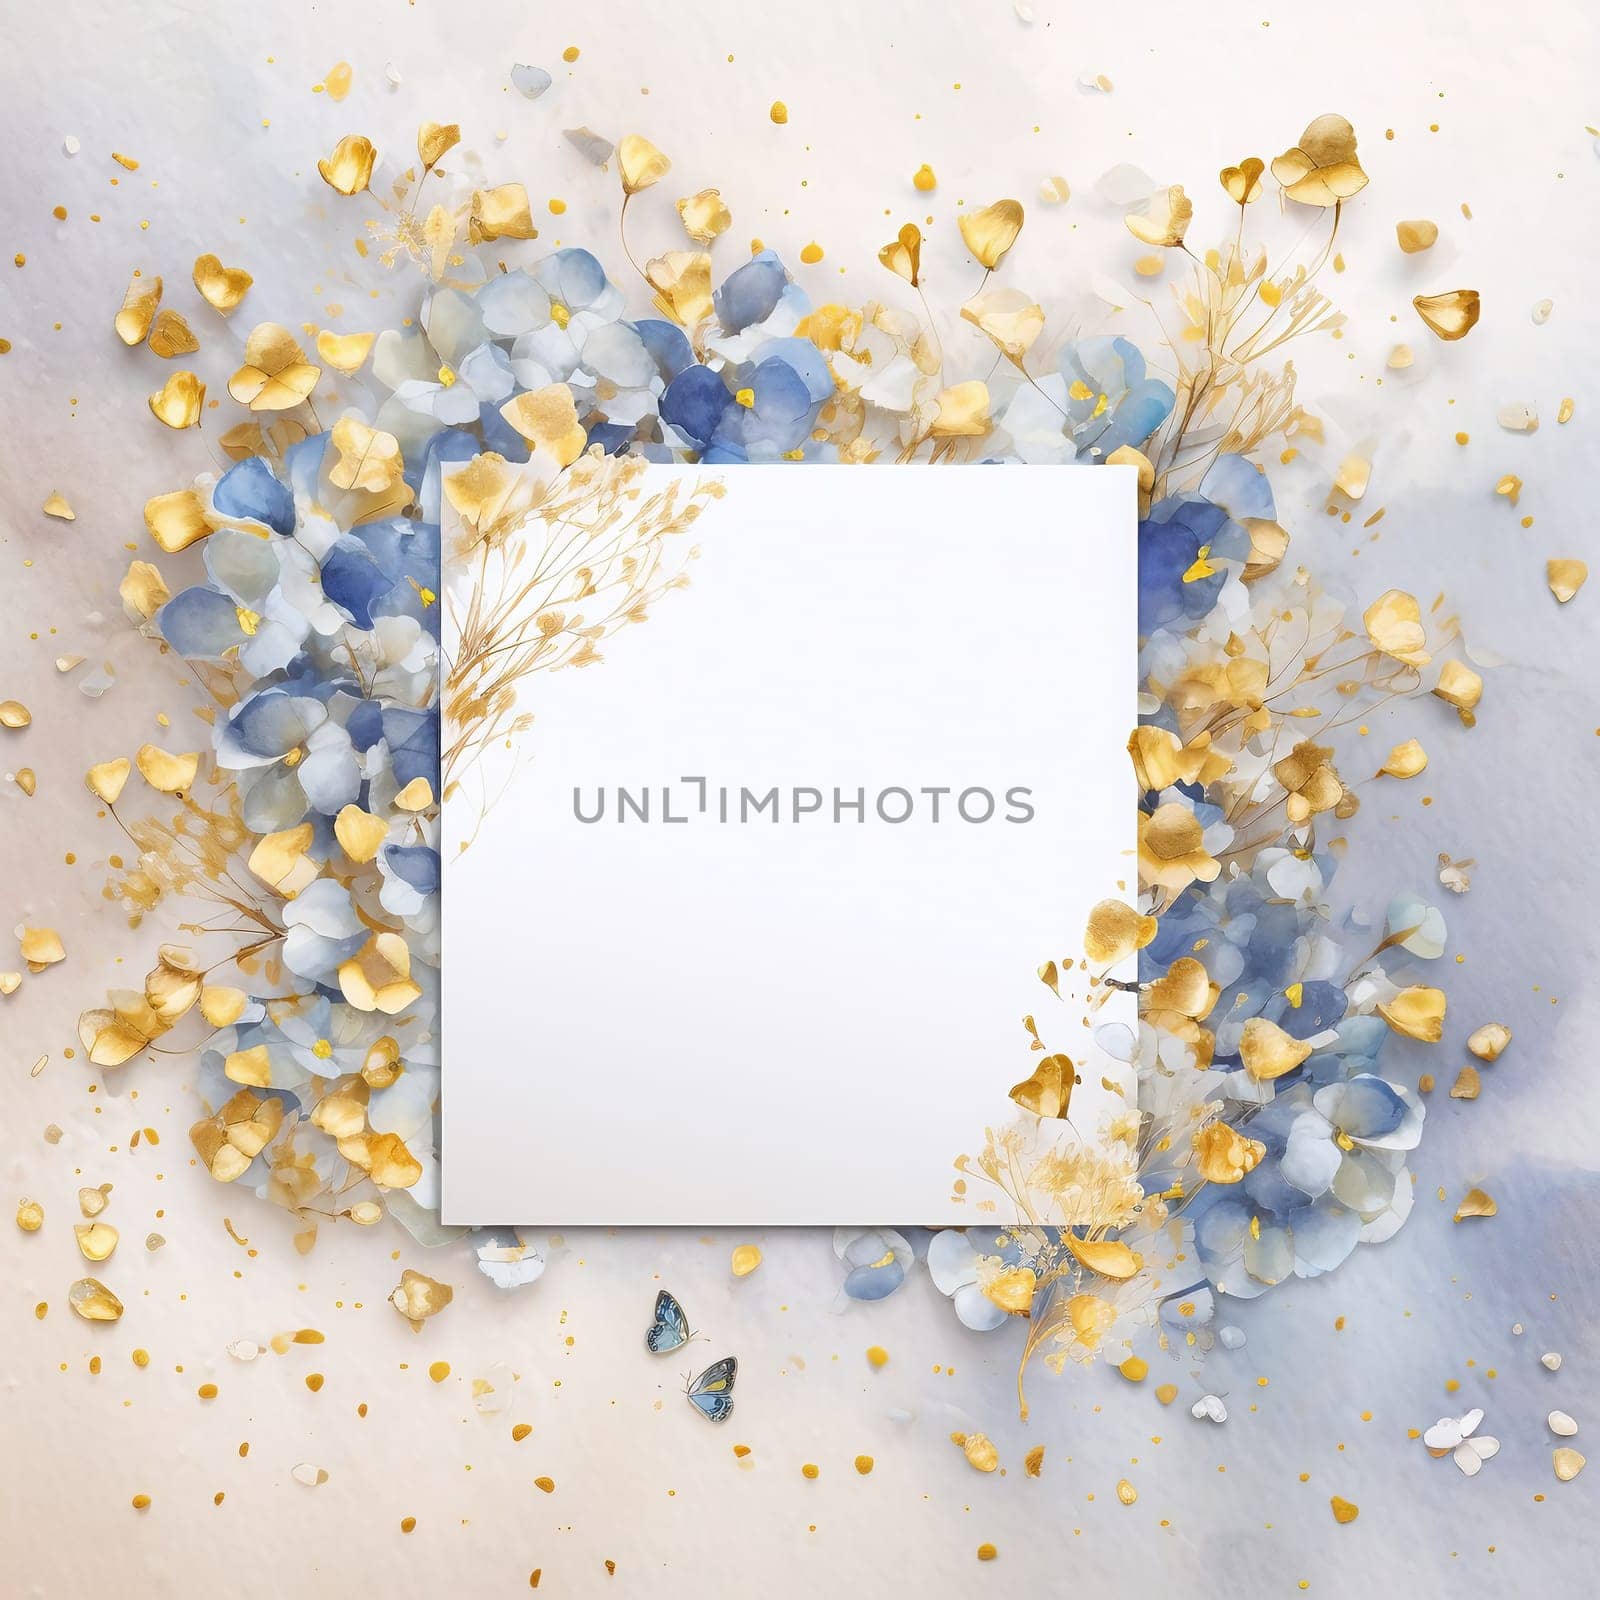 White blank with space for your own content, around decorations of white, blue and gold flowers with confetti. New Year fun and festivities.